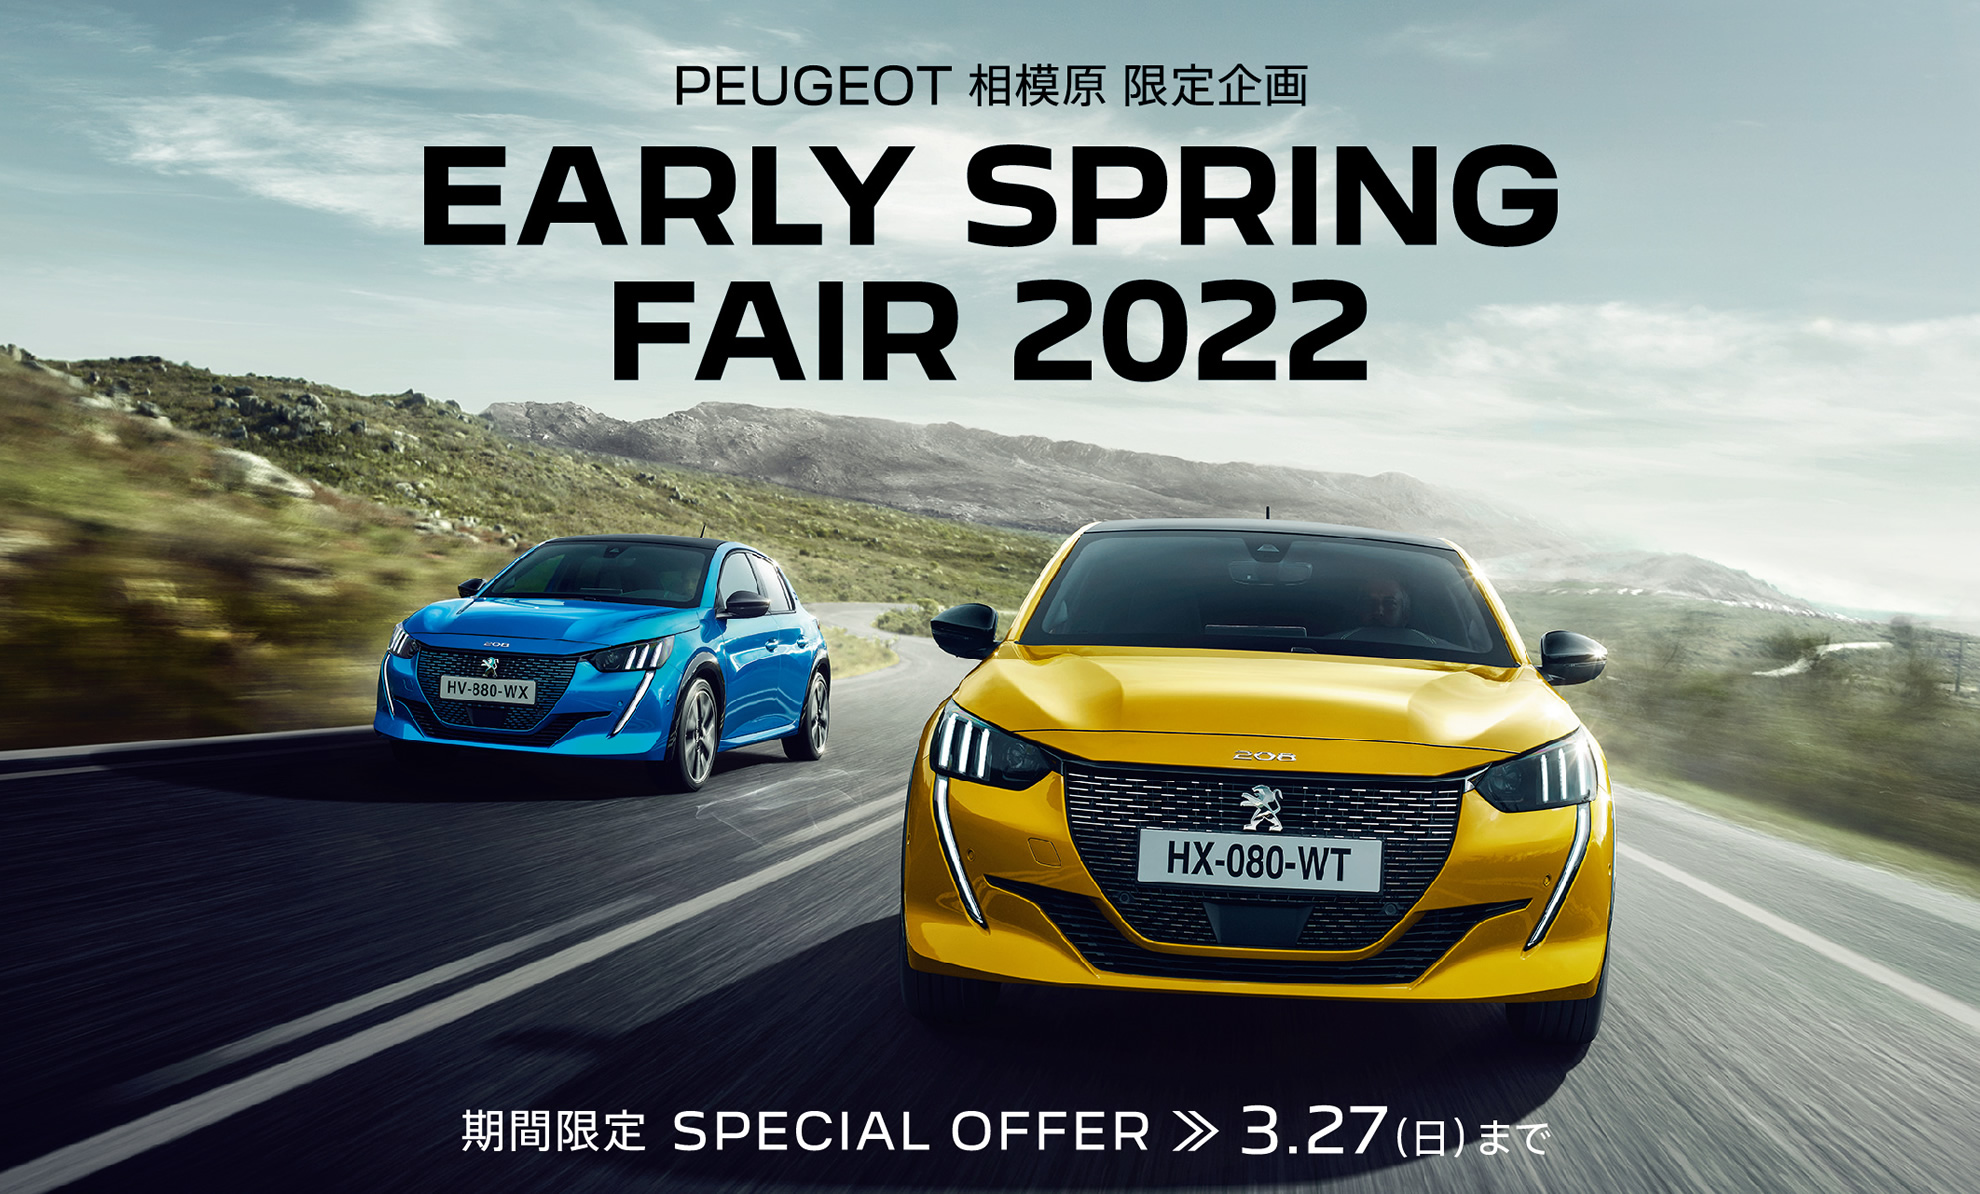 PEUGEOT 相模原限定企画 | EARLY SPRING FAIR 2022 期間限定SPECIAL OFFER 3.27 SUN. まで